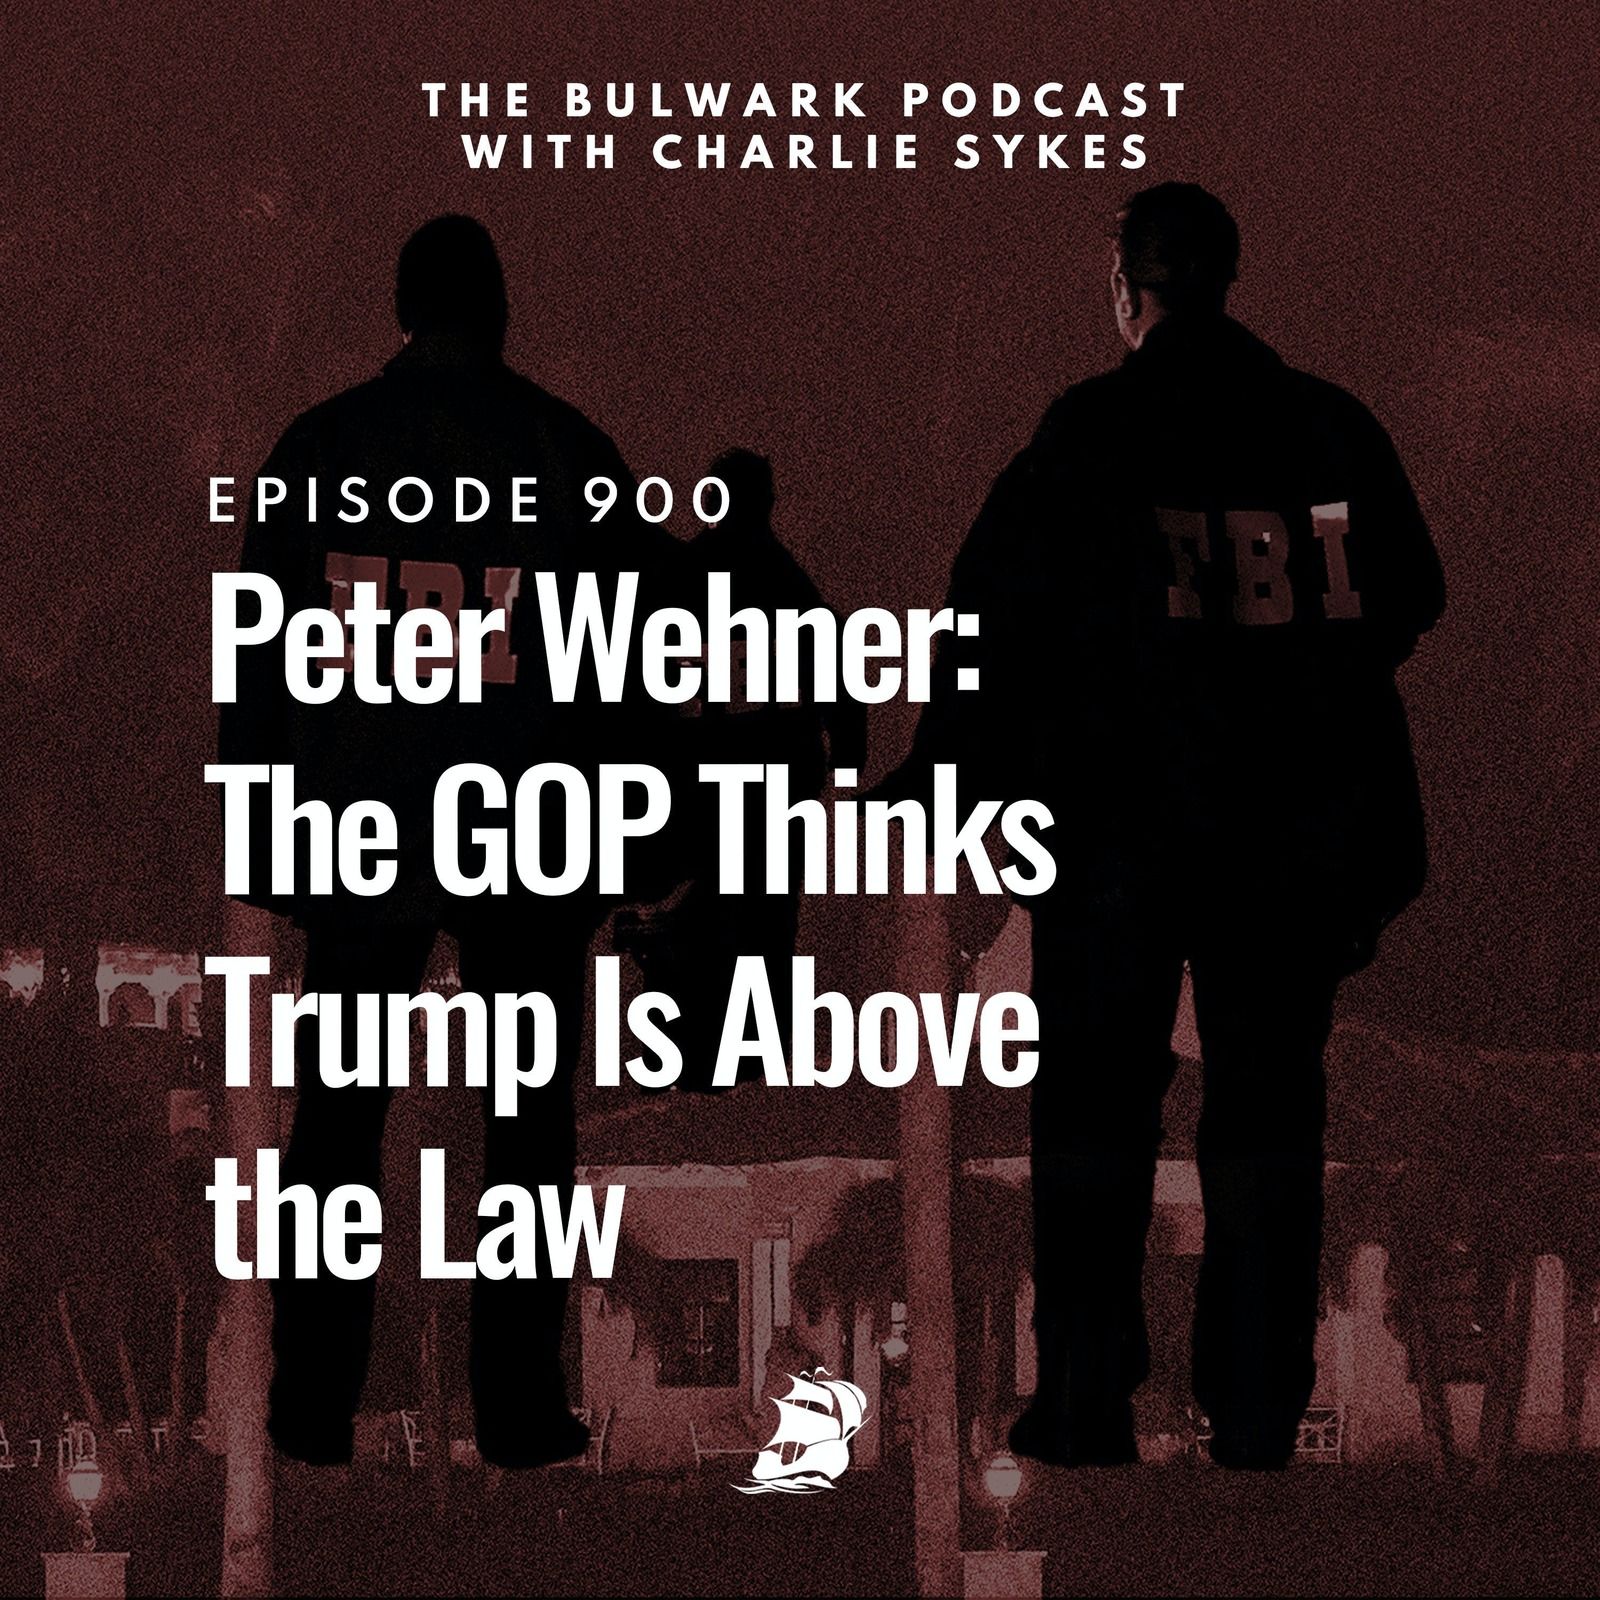 Peter Wehner: The GOP Thinks Trump Is above the Law